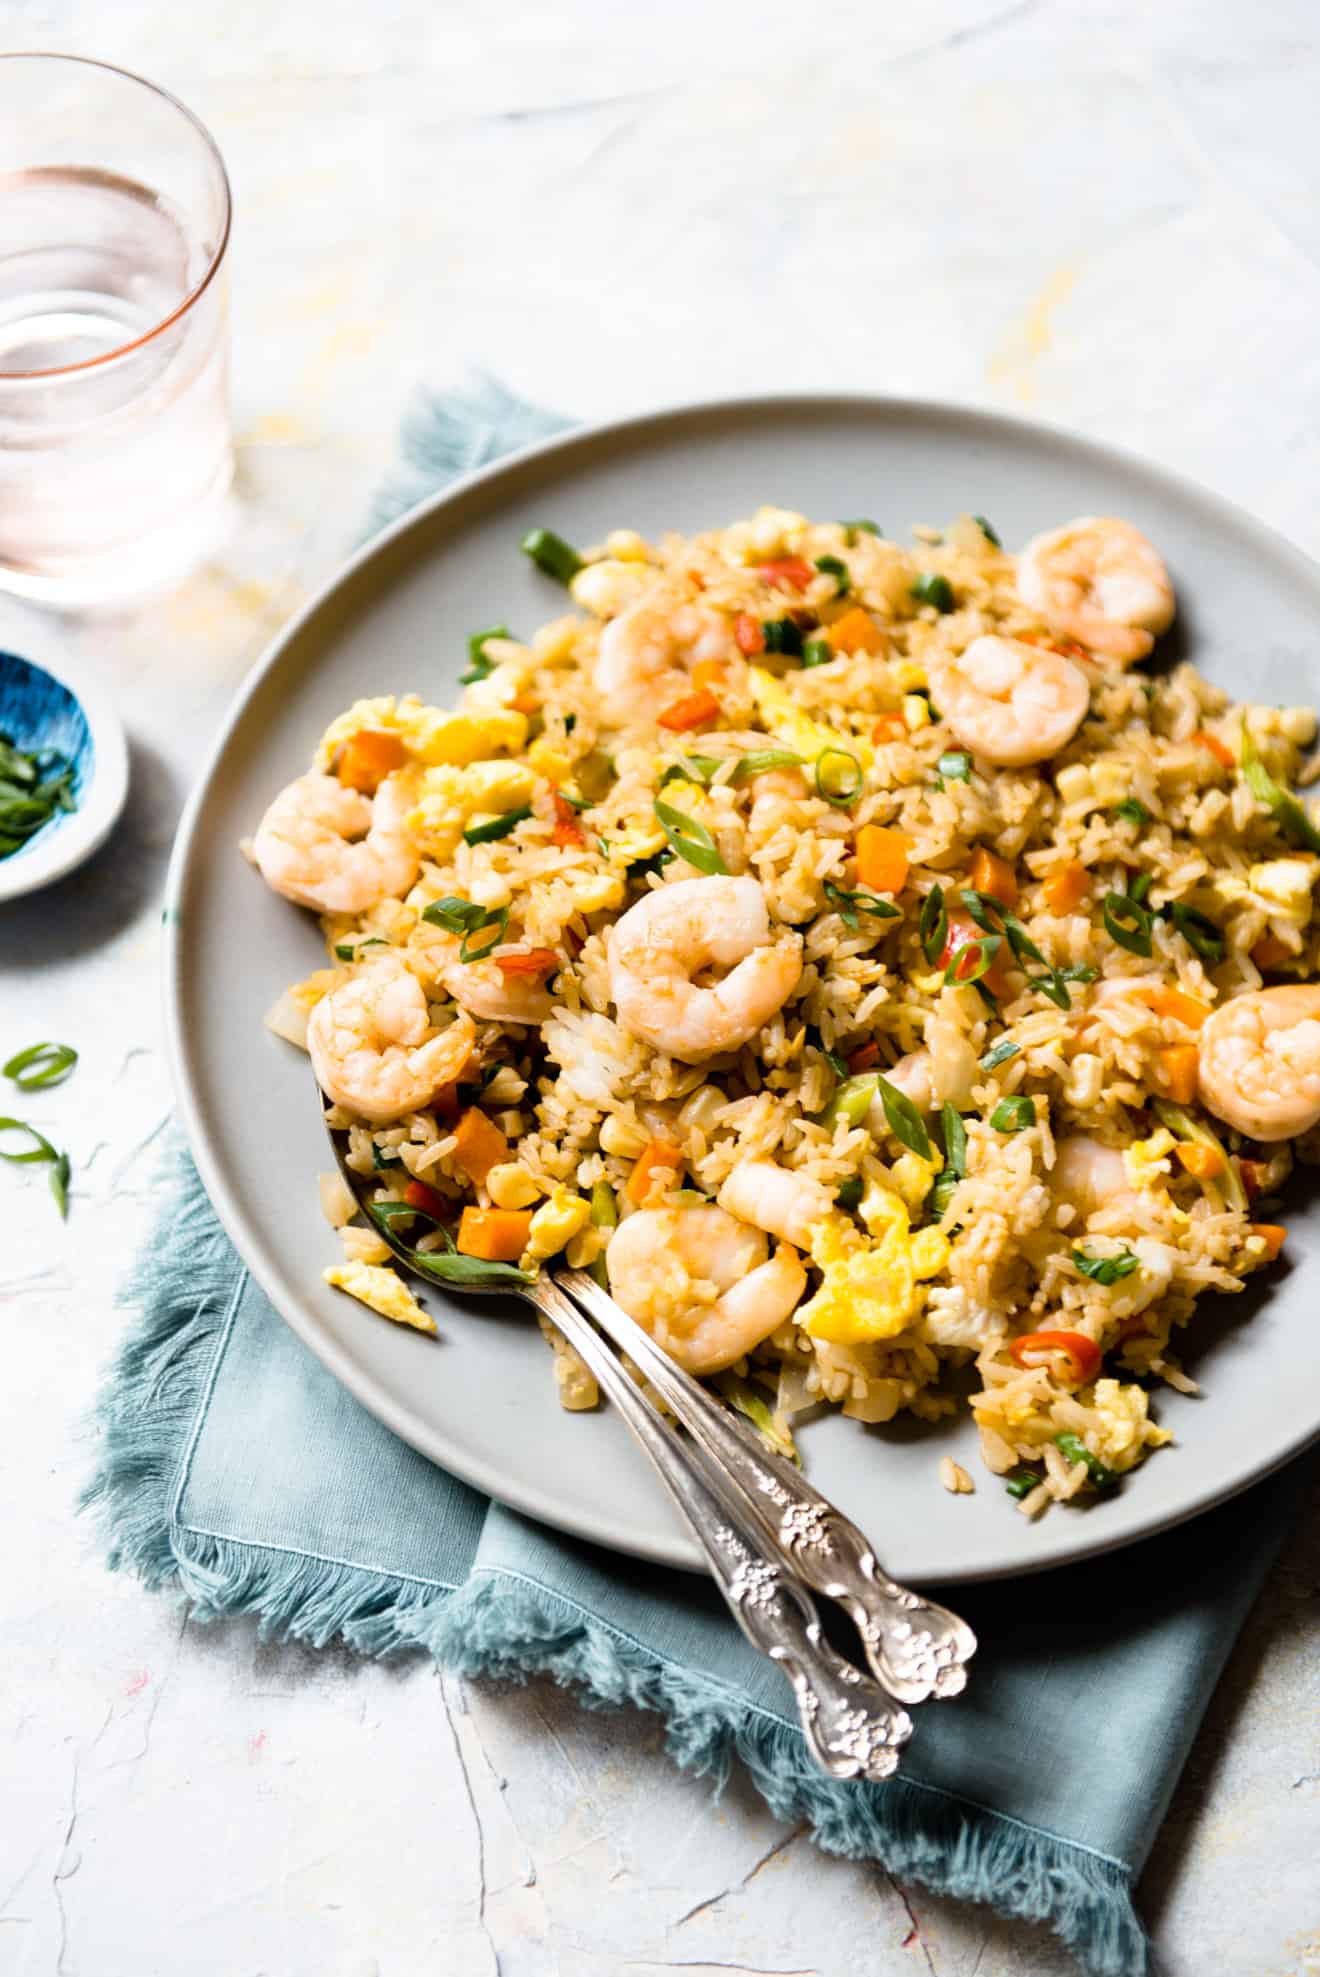 Shrimp Fried Rice Recipe - easy, healthy meal in less than 30 minutes!